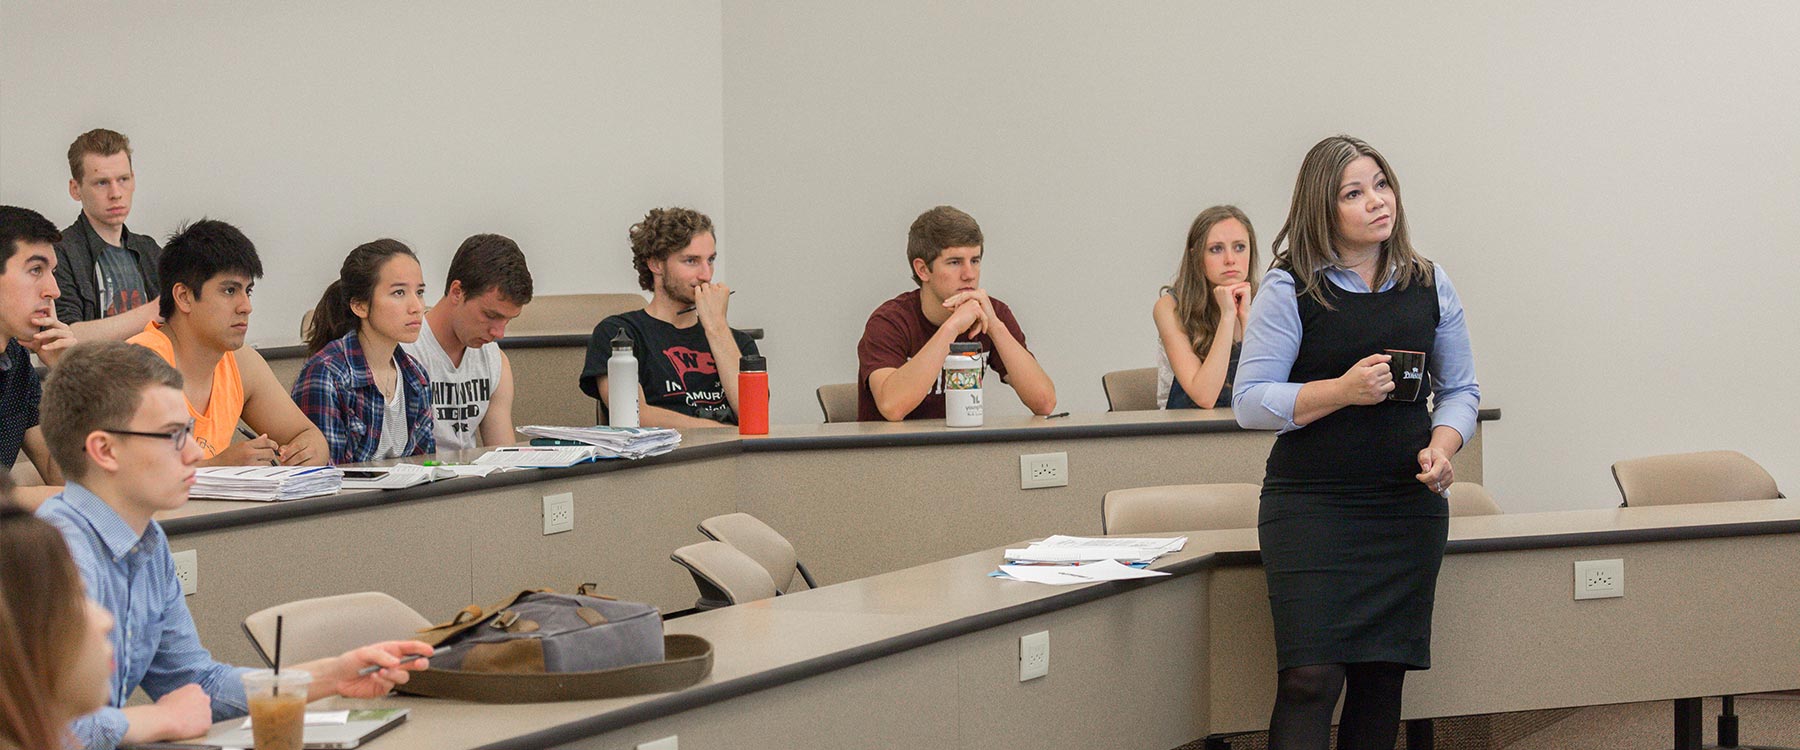 A professor stands in front of tiered rows of students holding a coffee cup. They all look toward the front of the classroom.